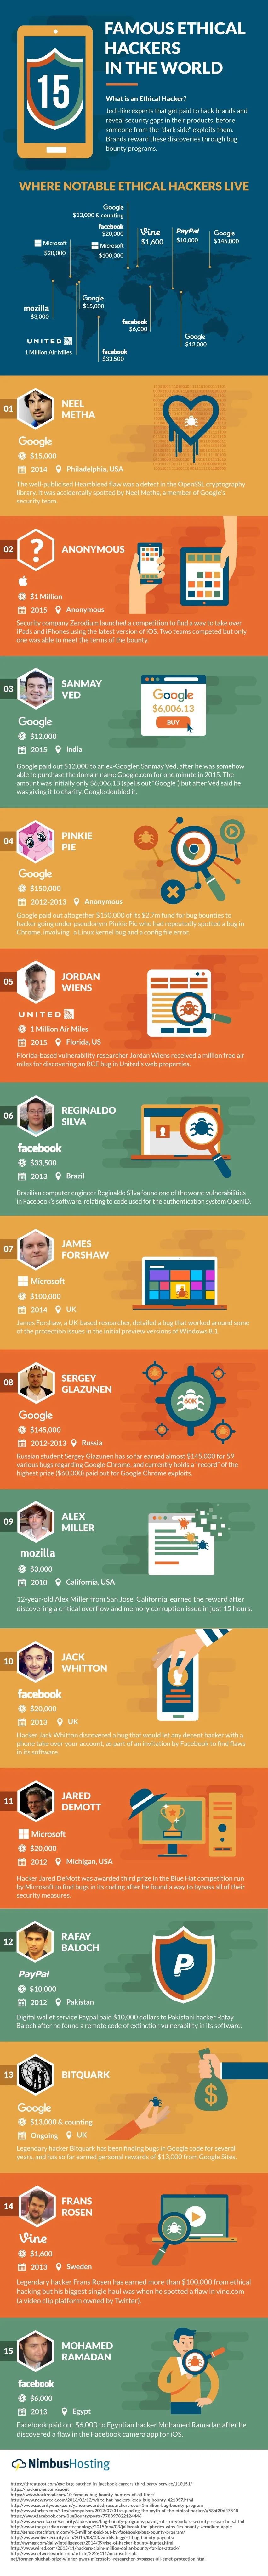 15 Famous Ethical Hackers In The World - #infographic